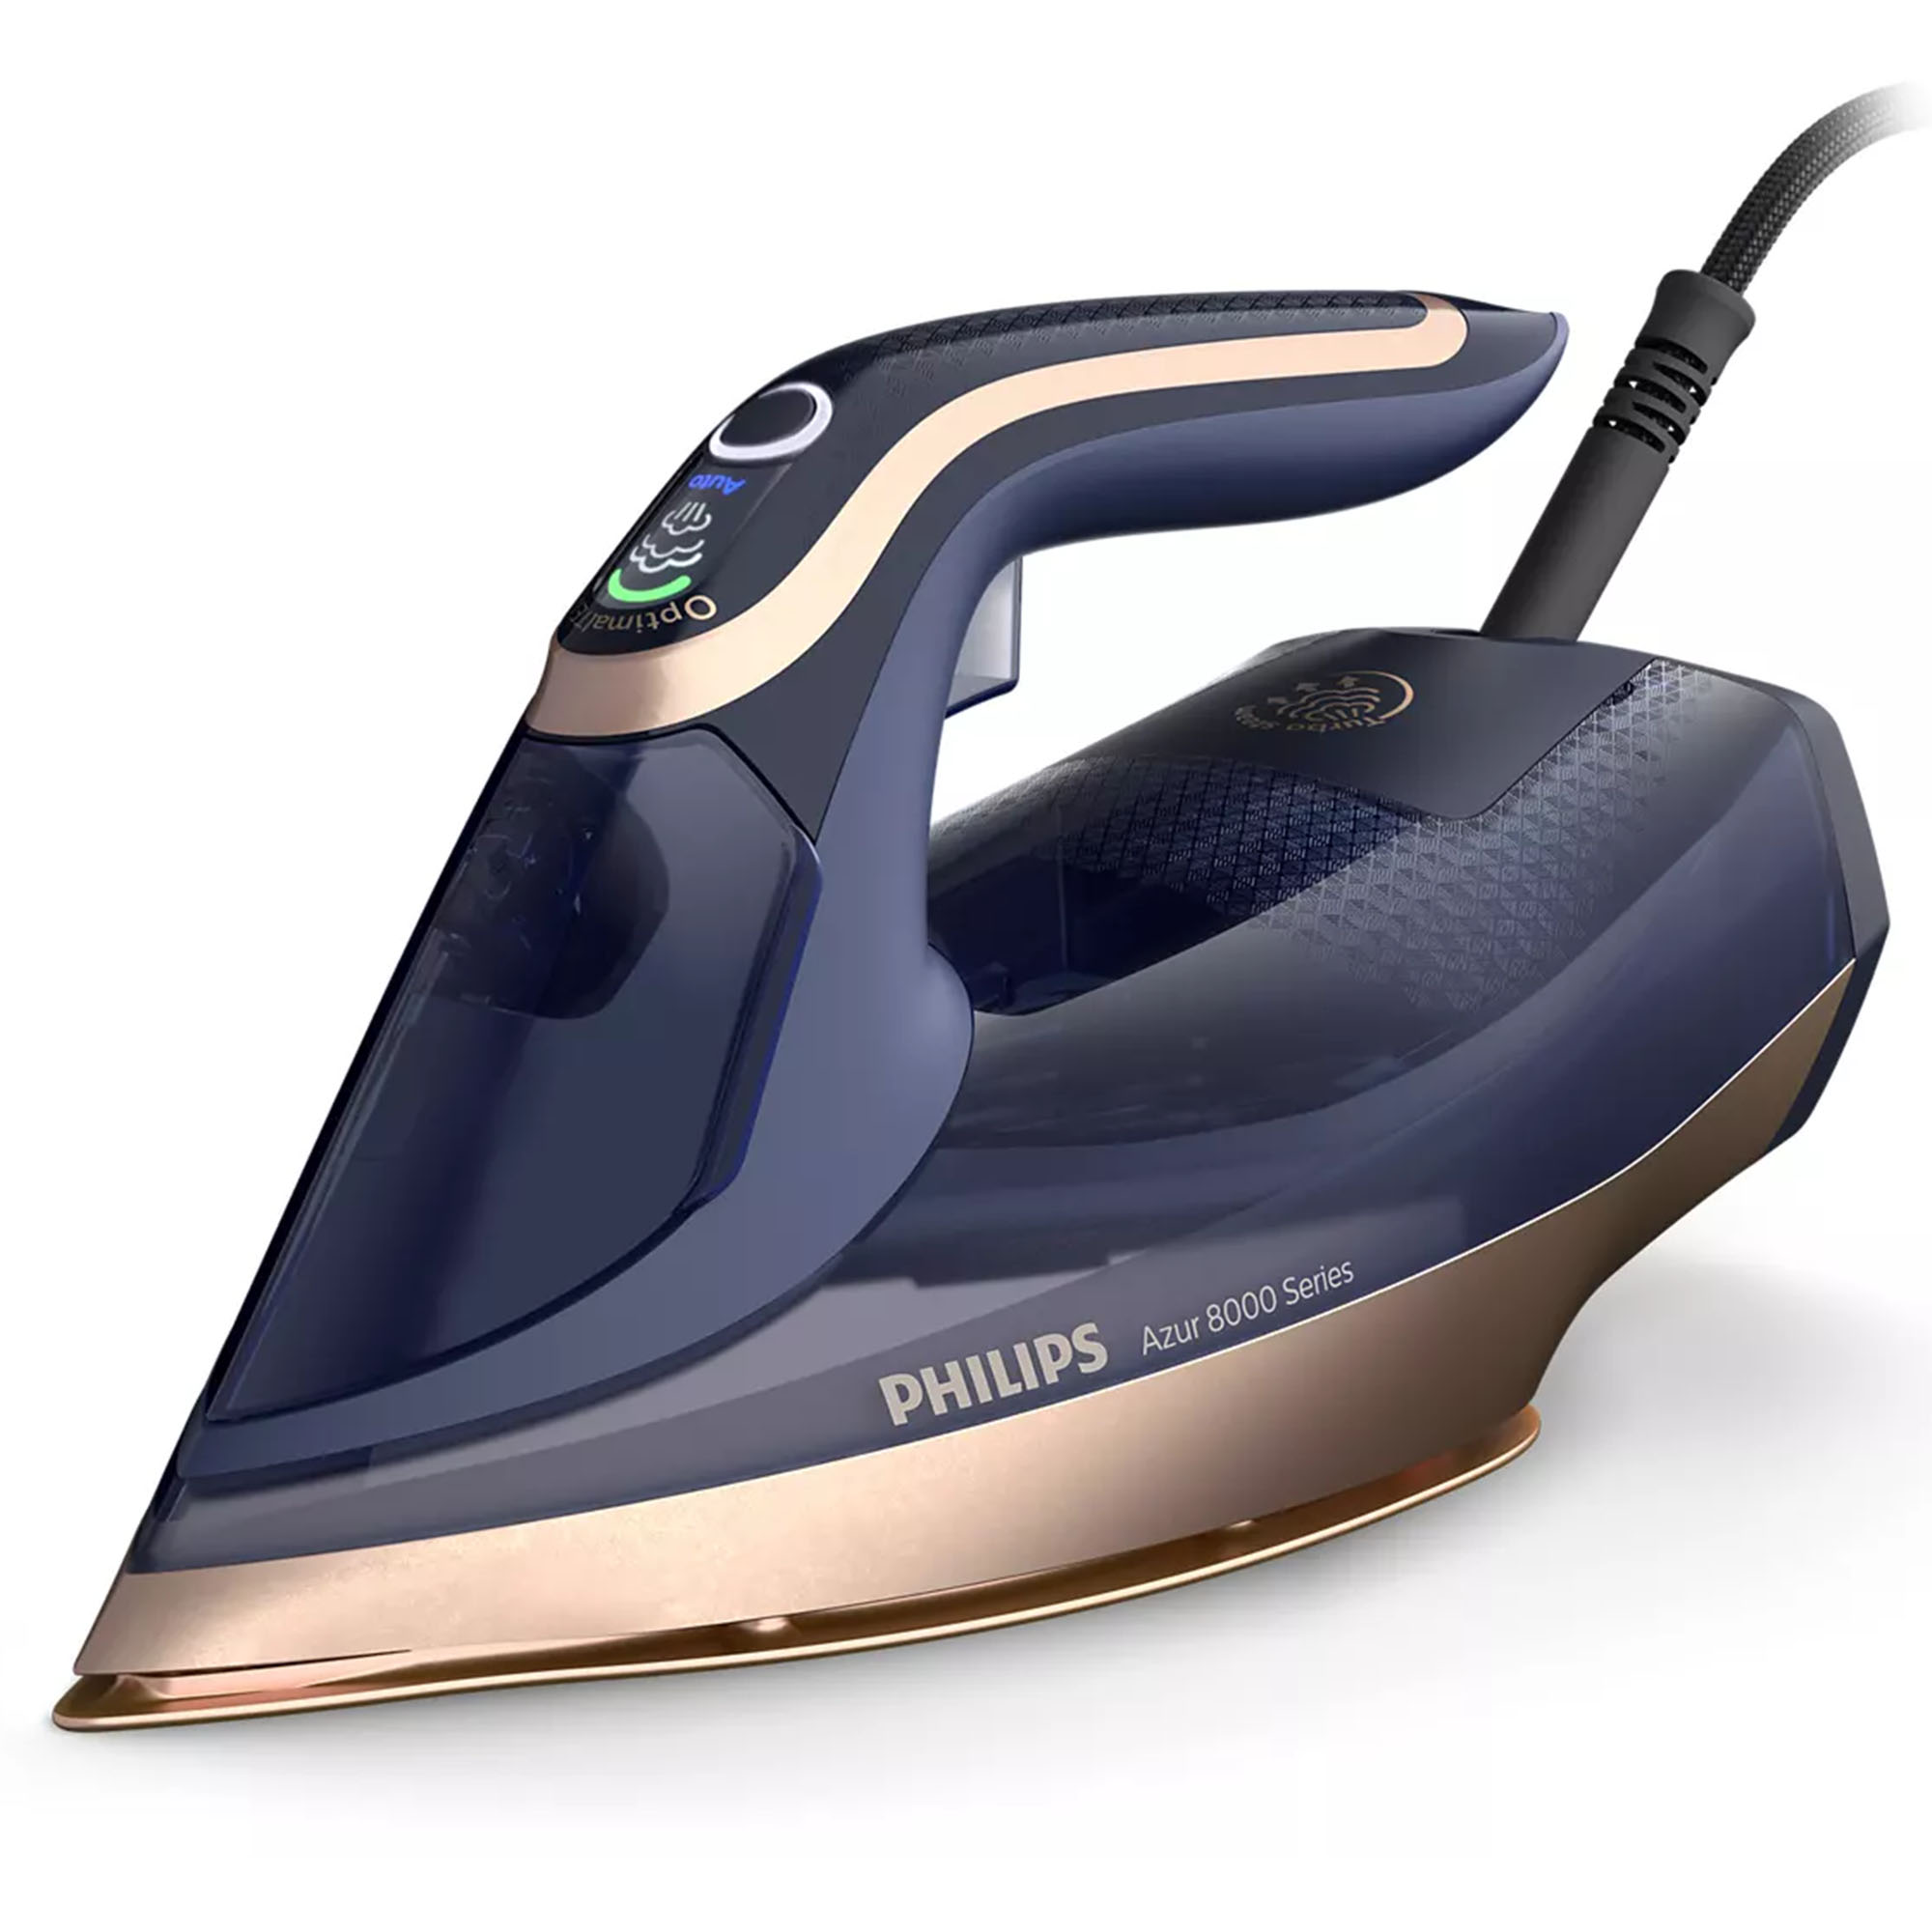 Philips PerfectCare Elite Steam Iron Review - U me and the kids